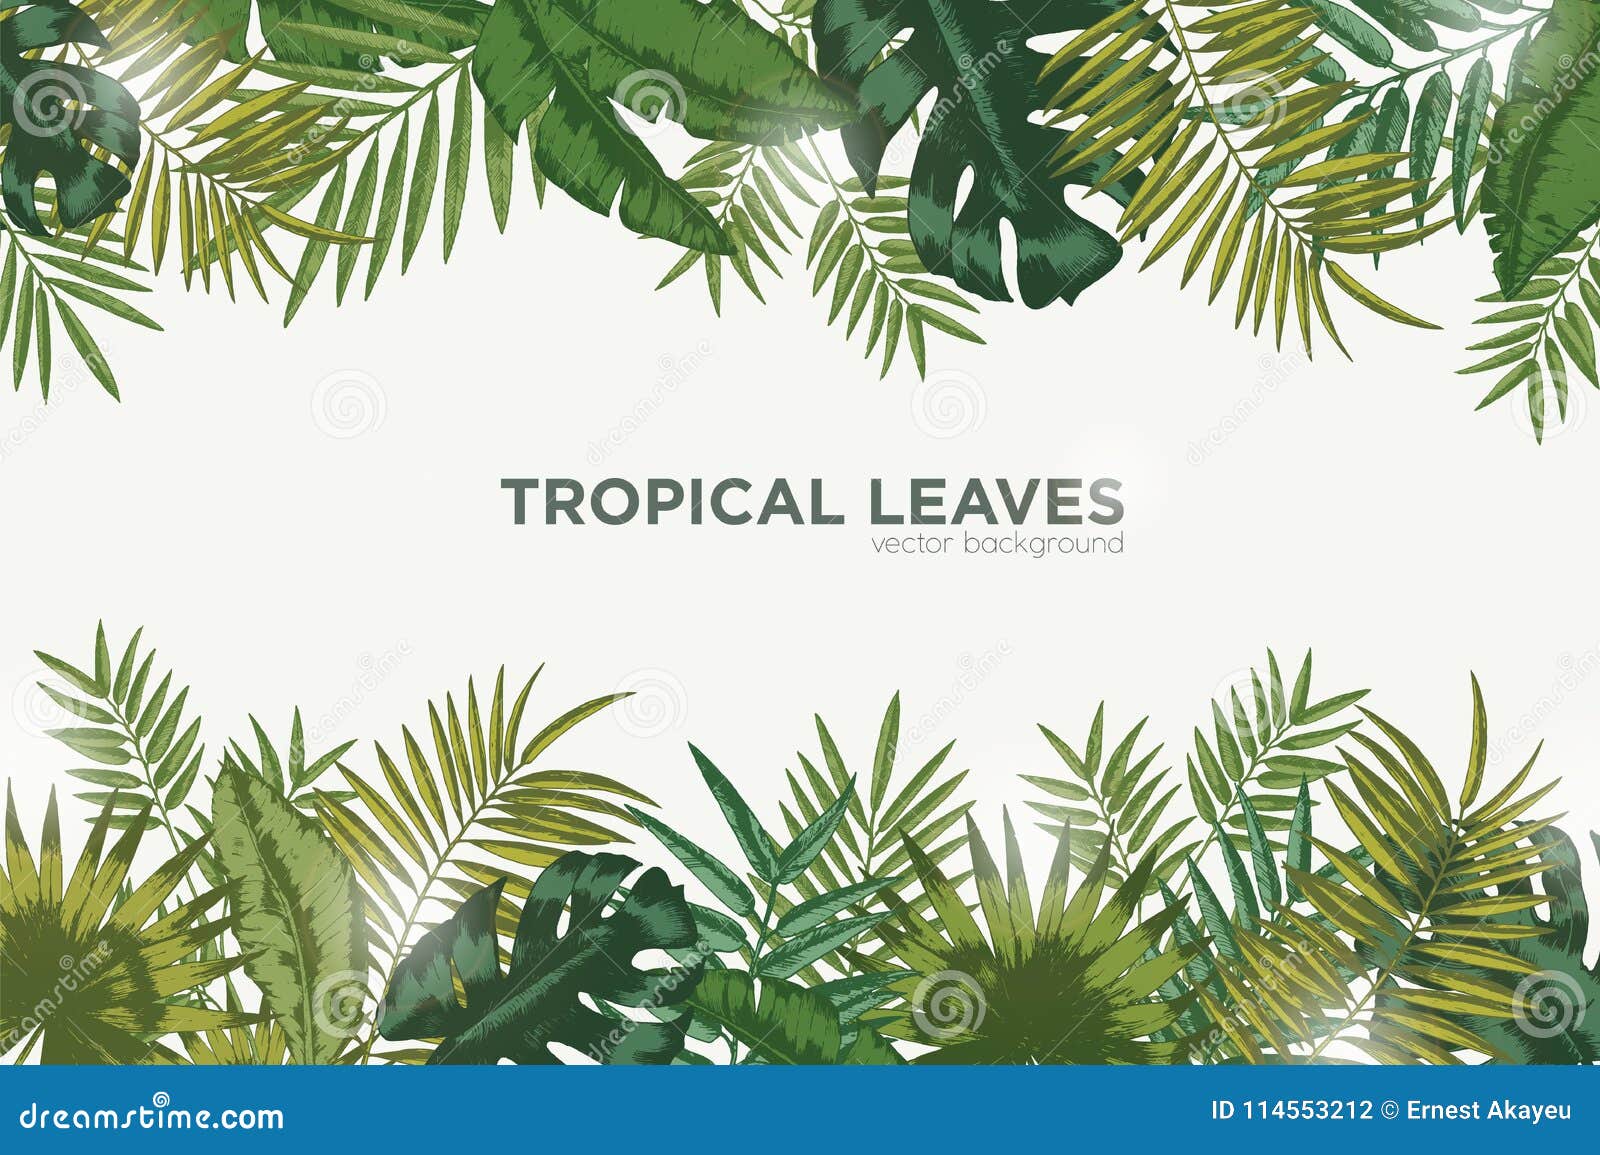 horizontal background with green leaves of tropical palm tree, banana and monstera. elegant backdrop decorated with